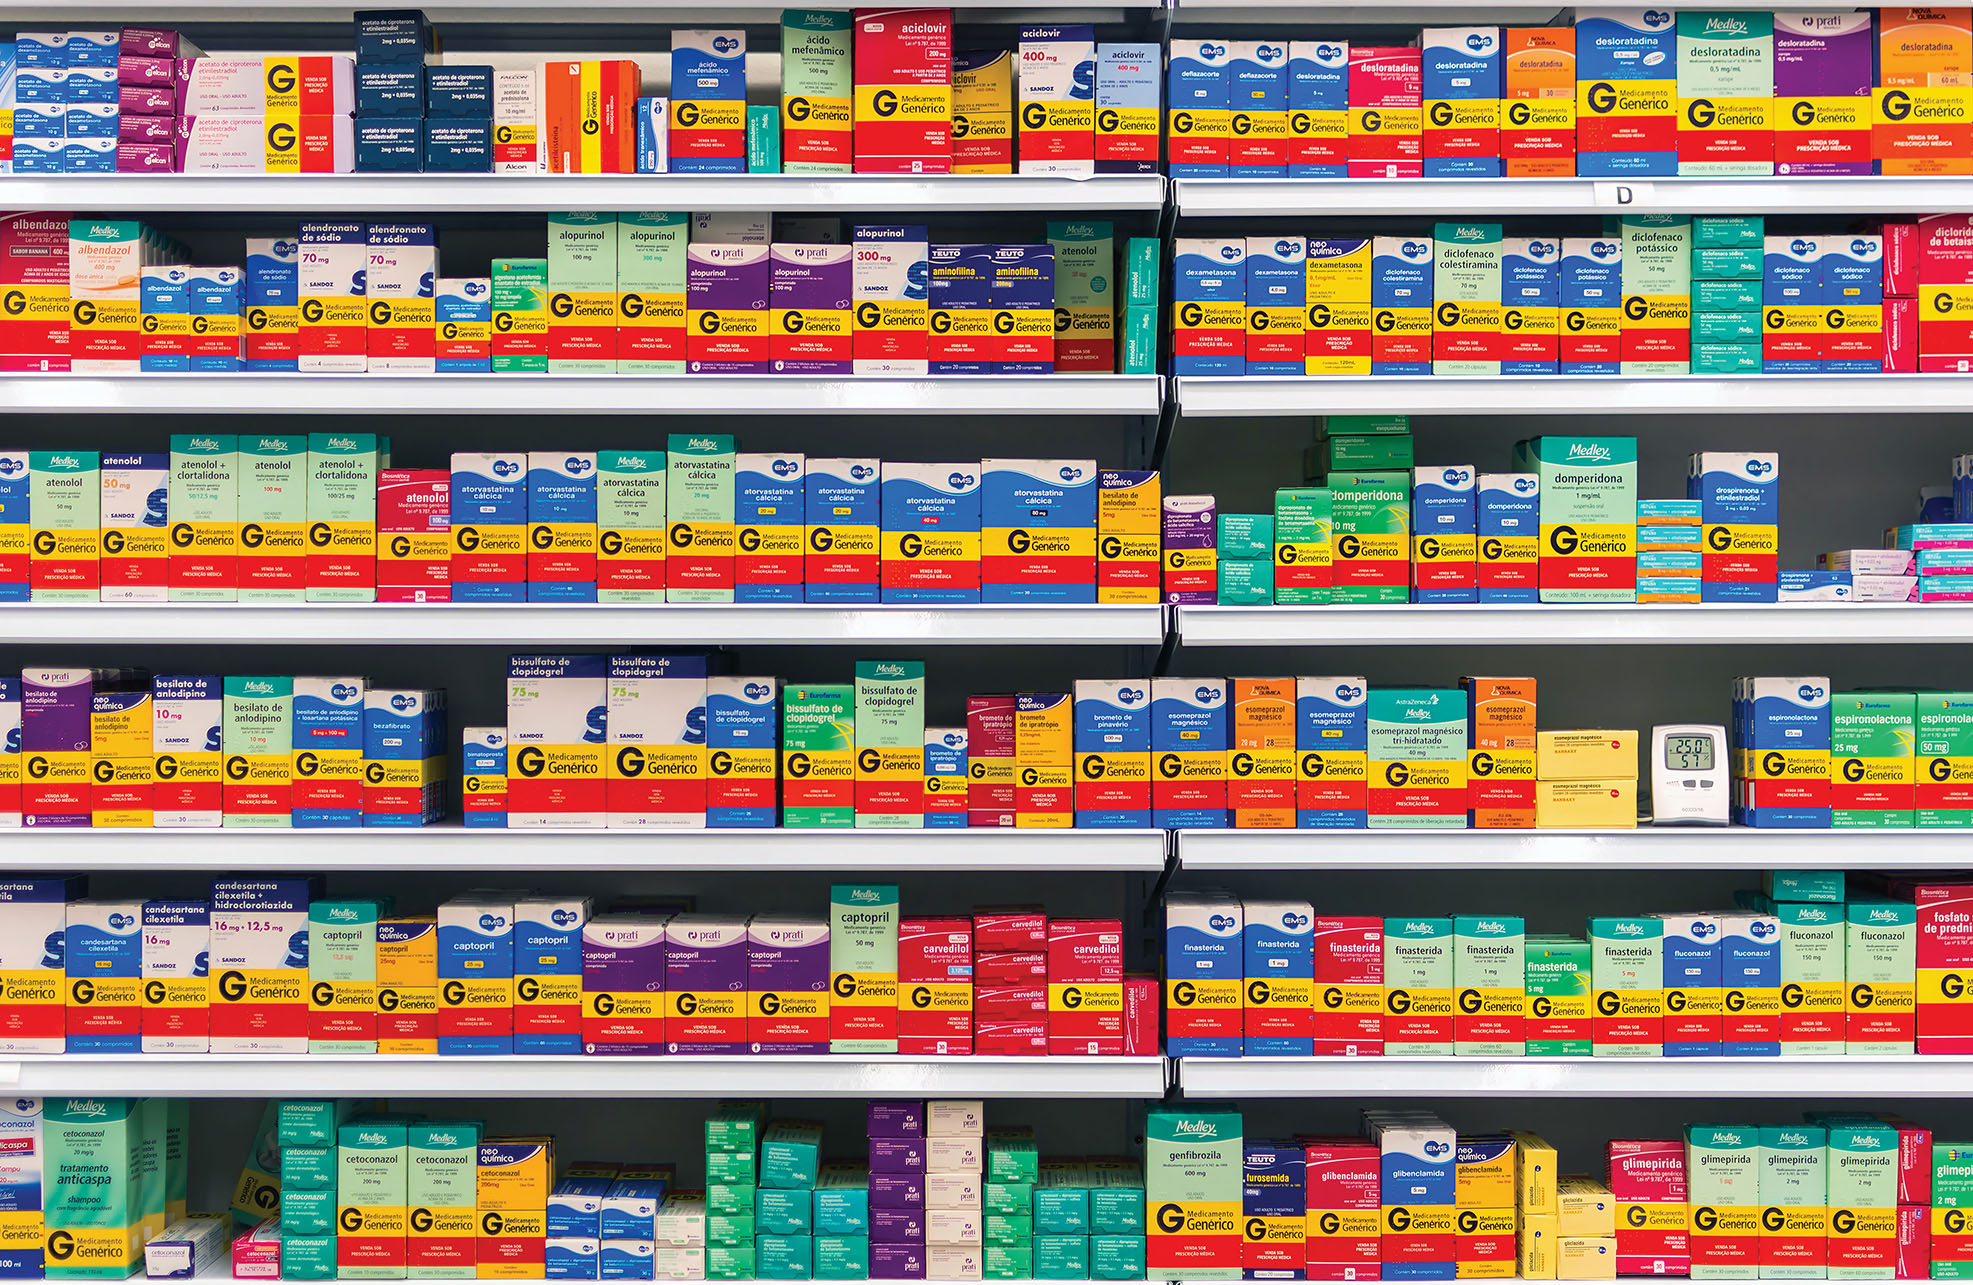 Generic drugs on display in a pharmacy in Brazil. (Photo by Wilfredor.)